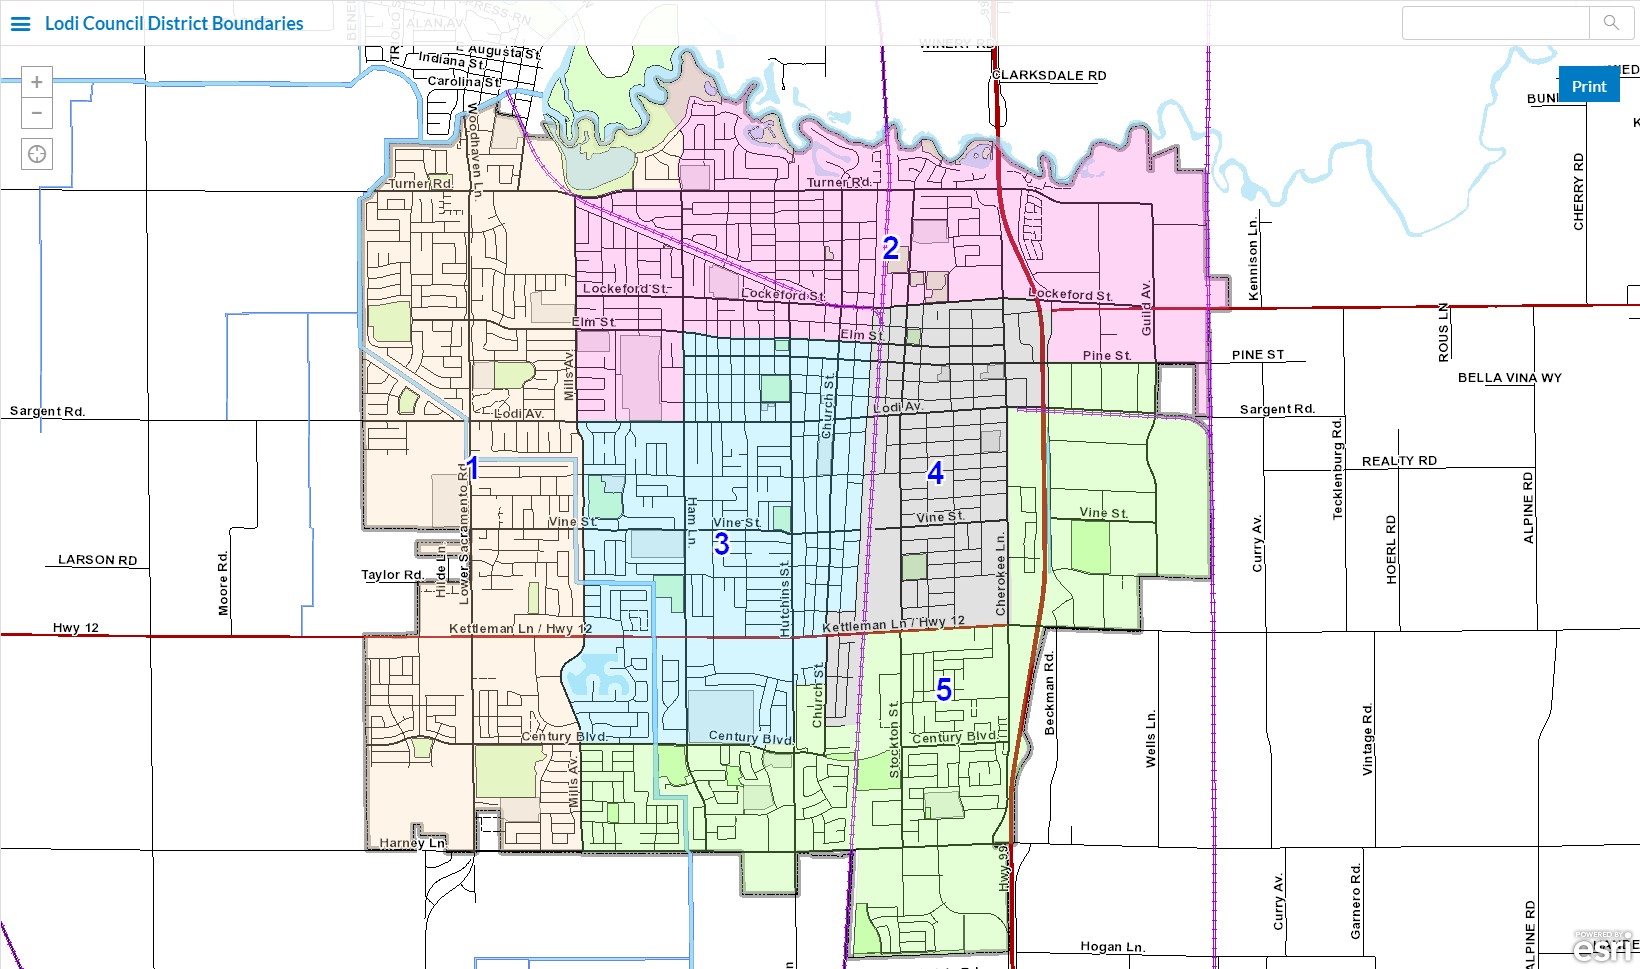 lodi-will-soon-redistrict-for-upcoming-city-council-elections-the